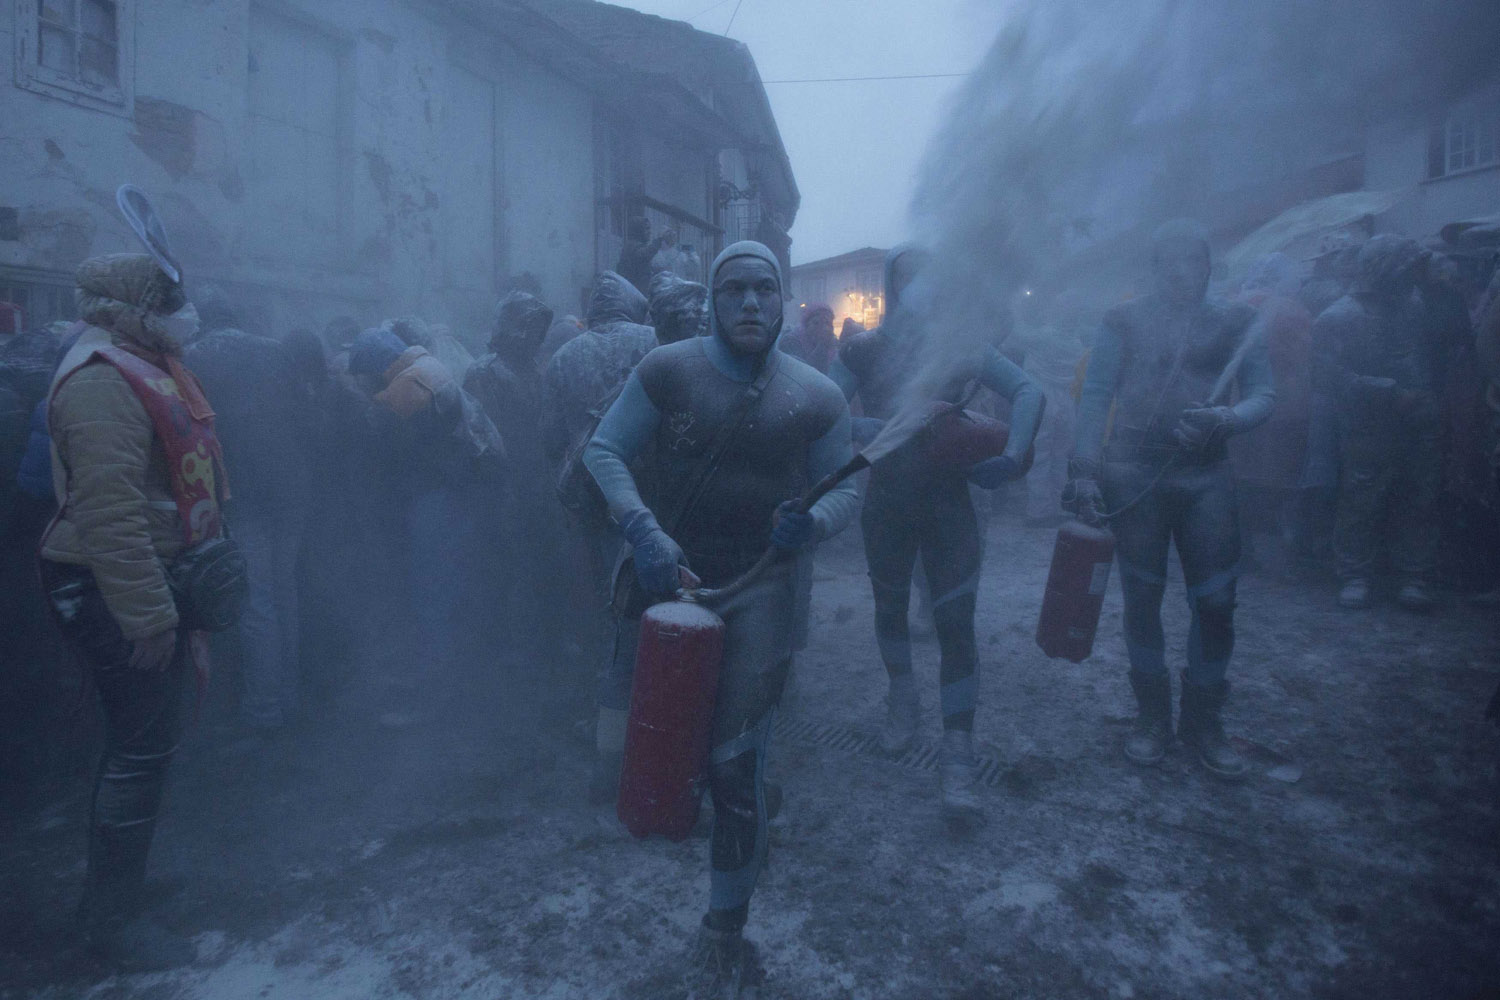 Revellers use fire extinguishers during a flour fight at the "O Entroido" festival in Spain's northwestern village of Laza